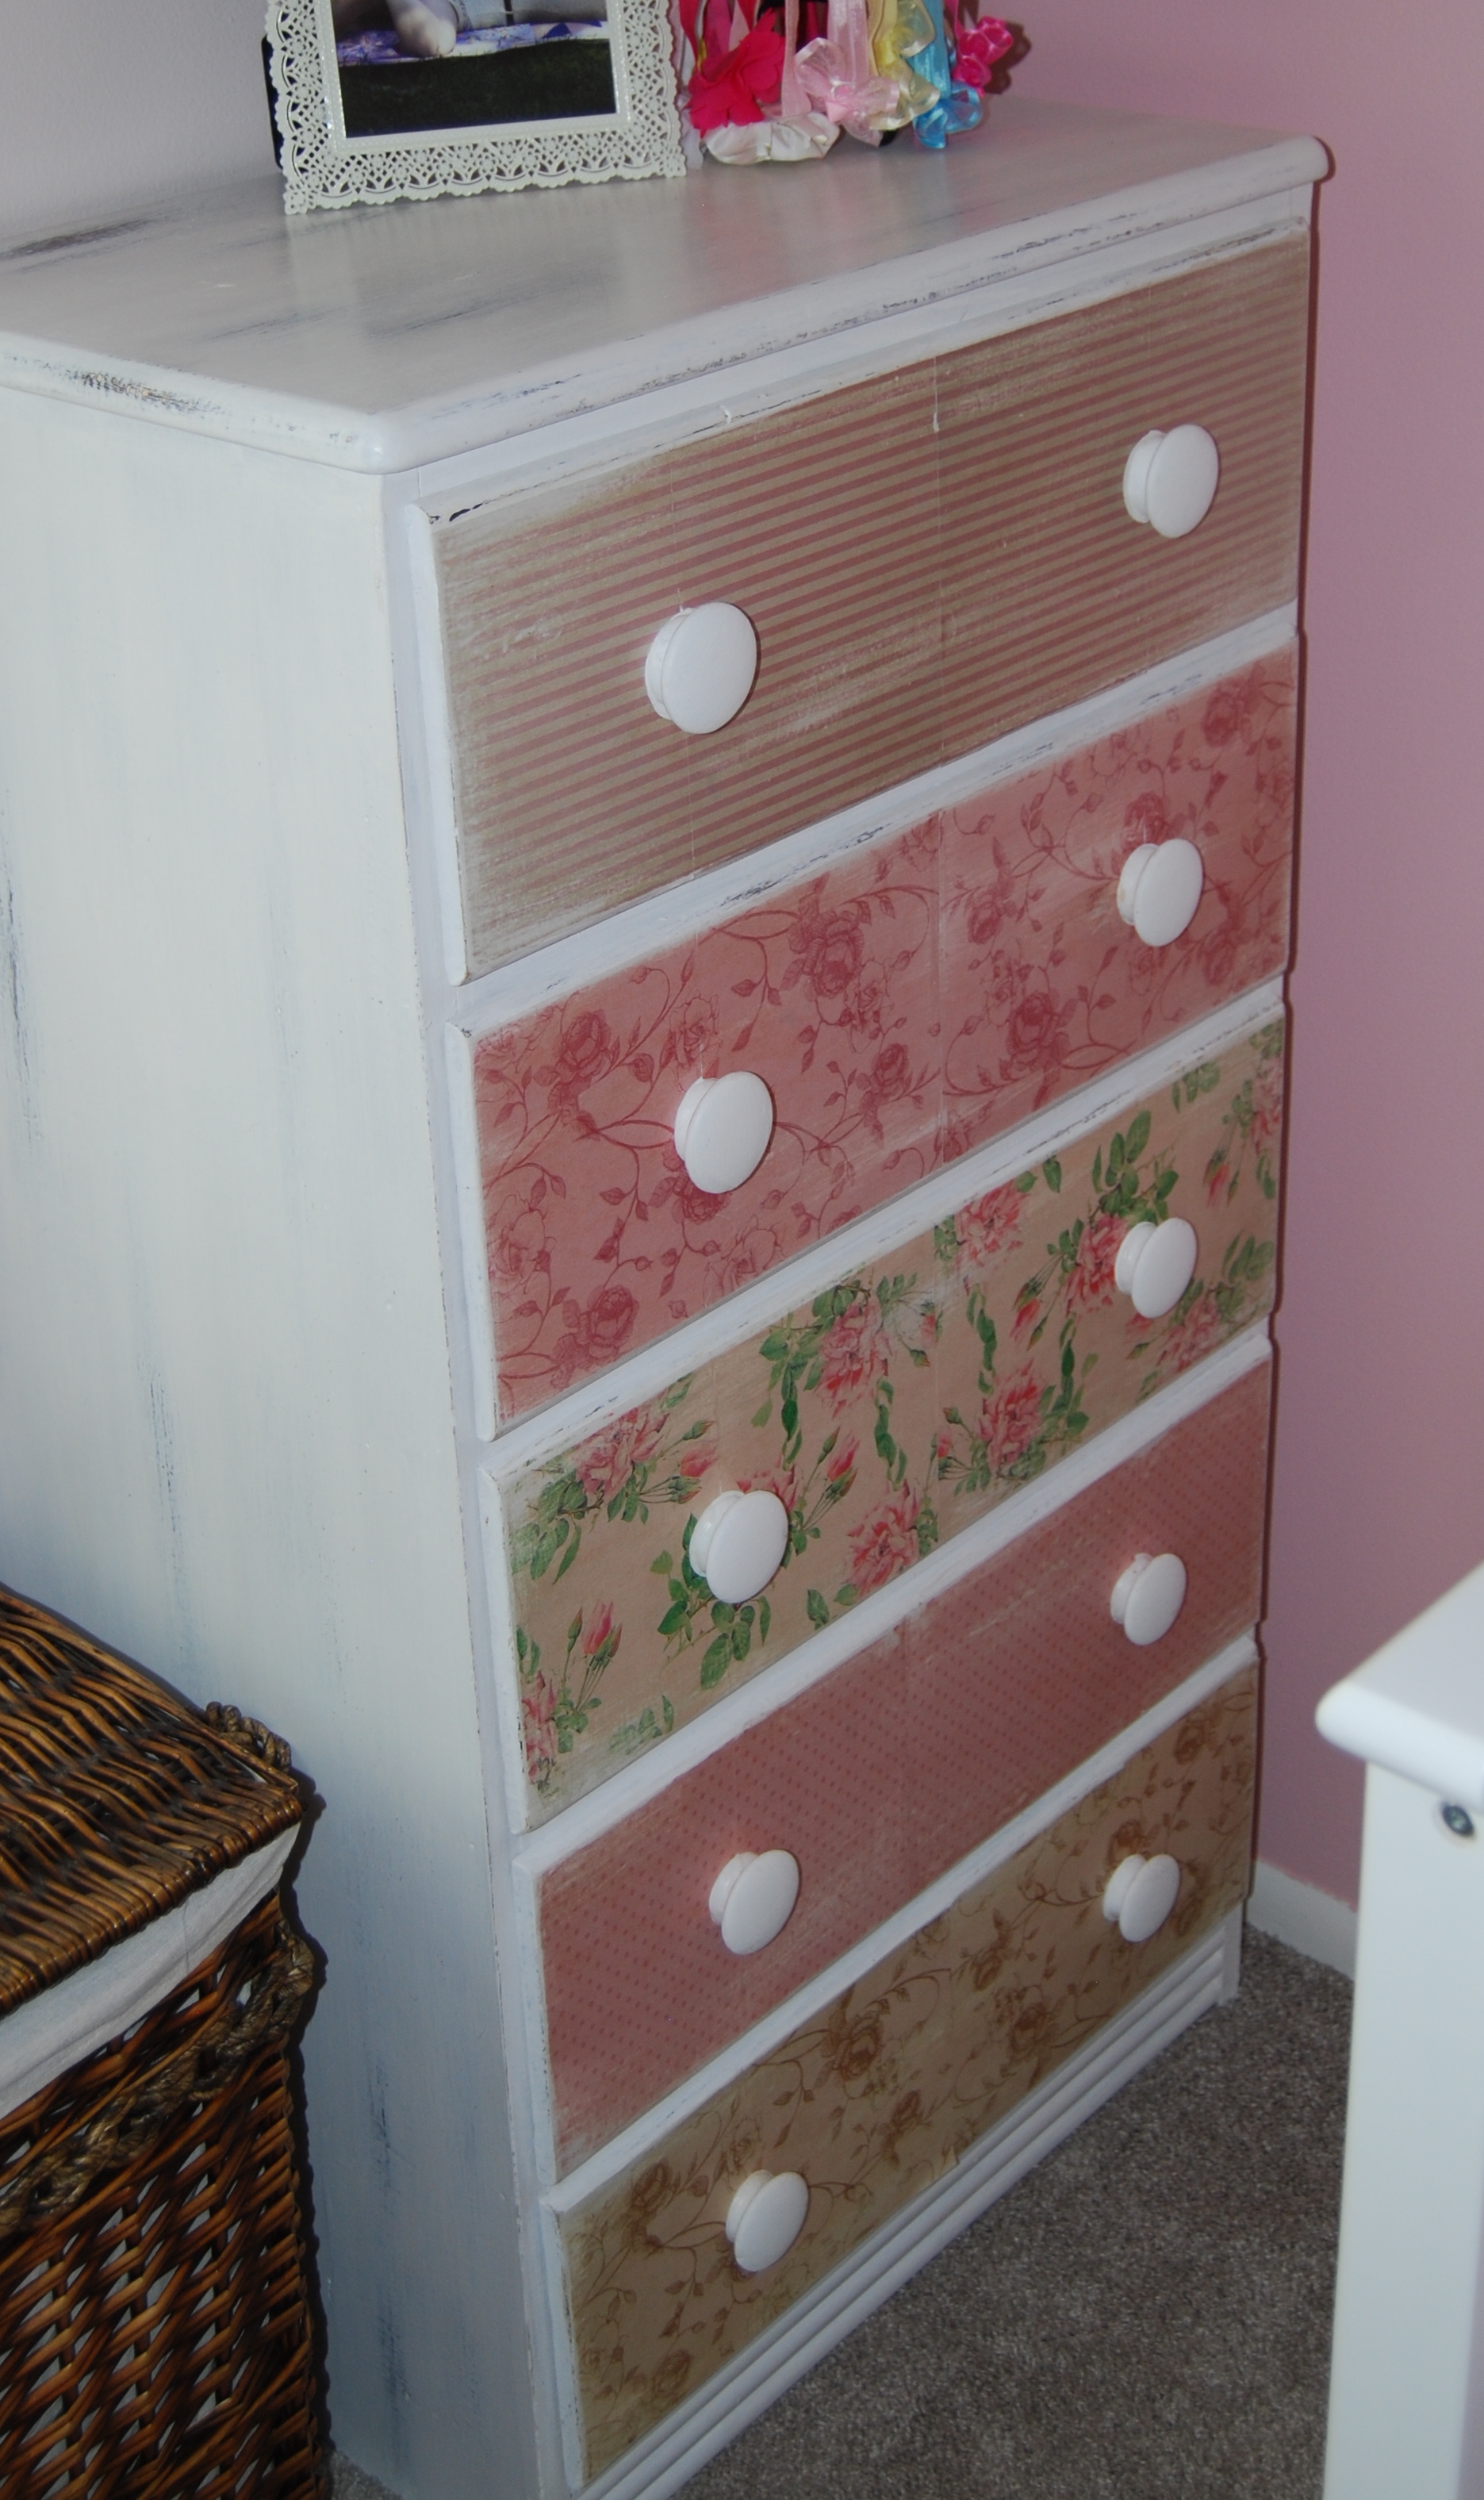 Refinished Shabby Chic Dresser Using Scrapbook Paper on the Drawer Fronts